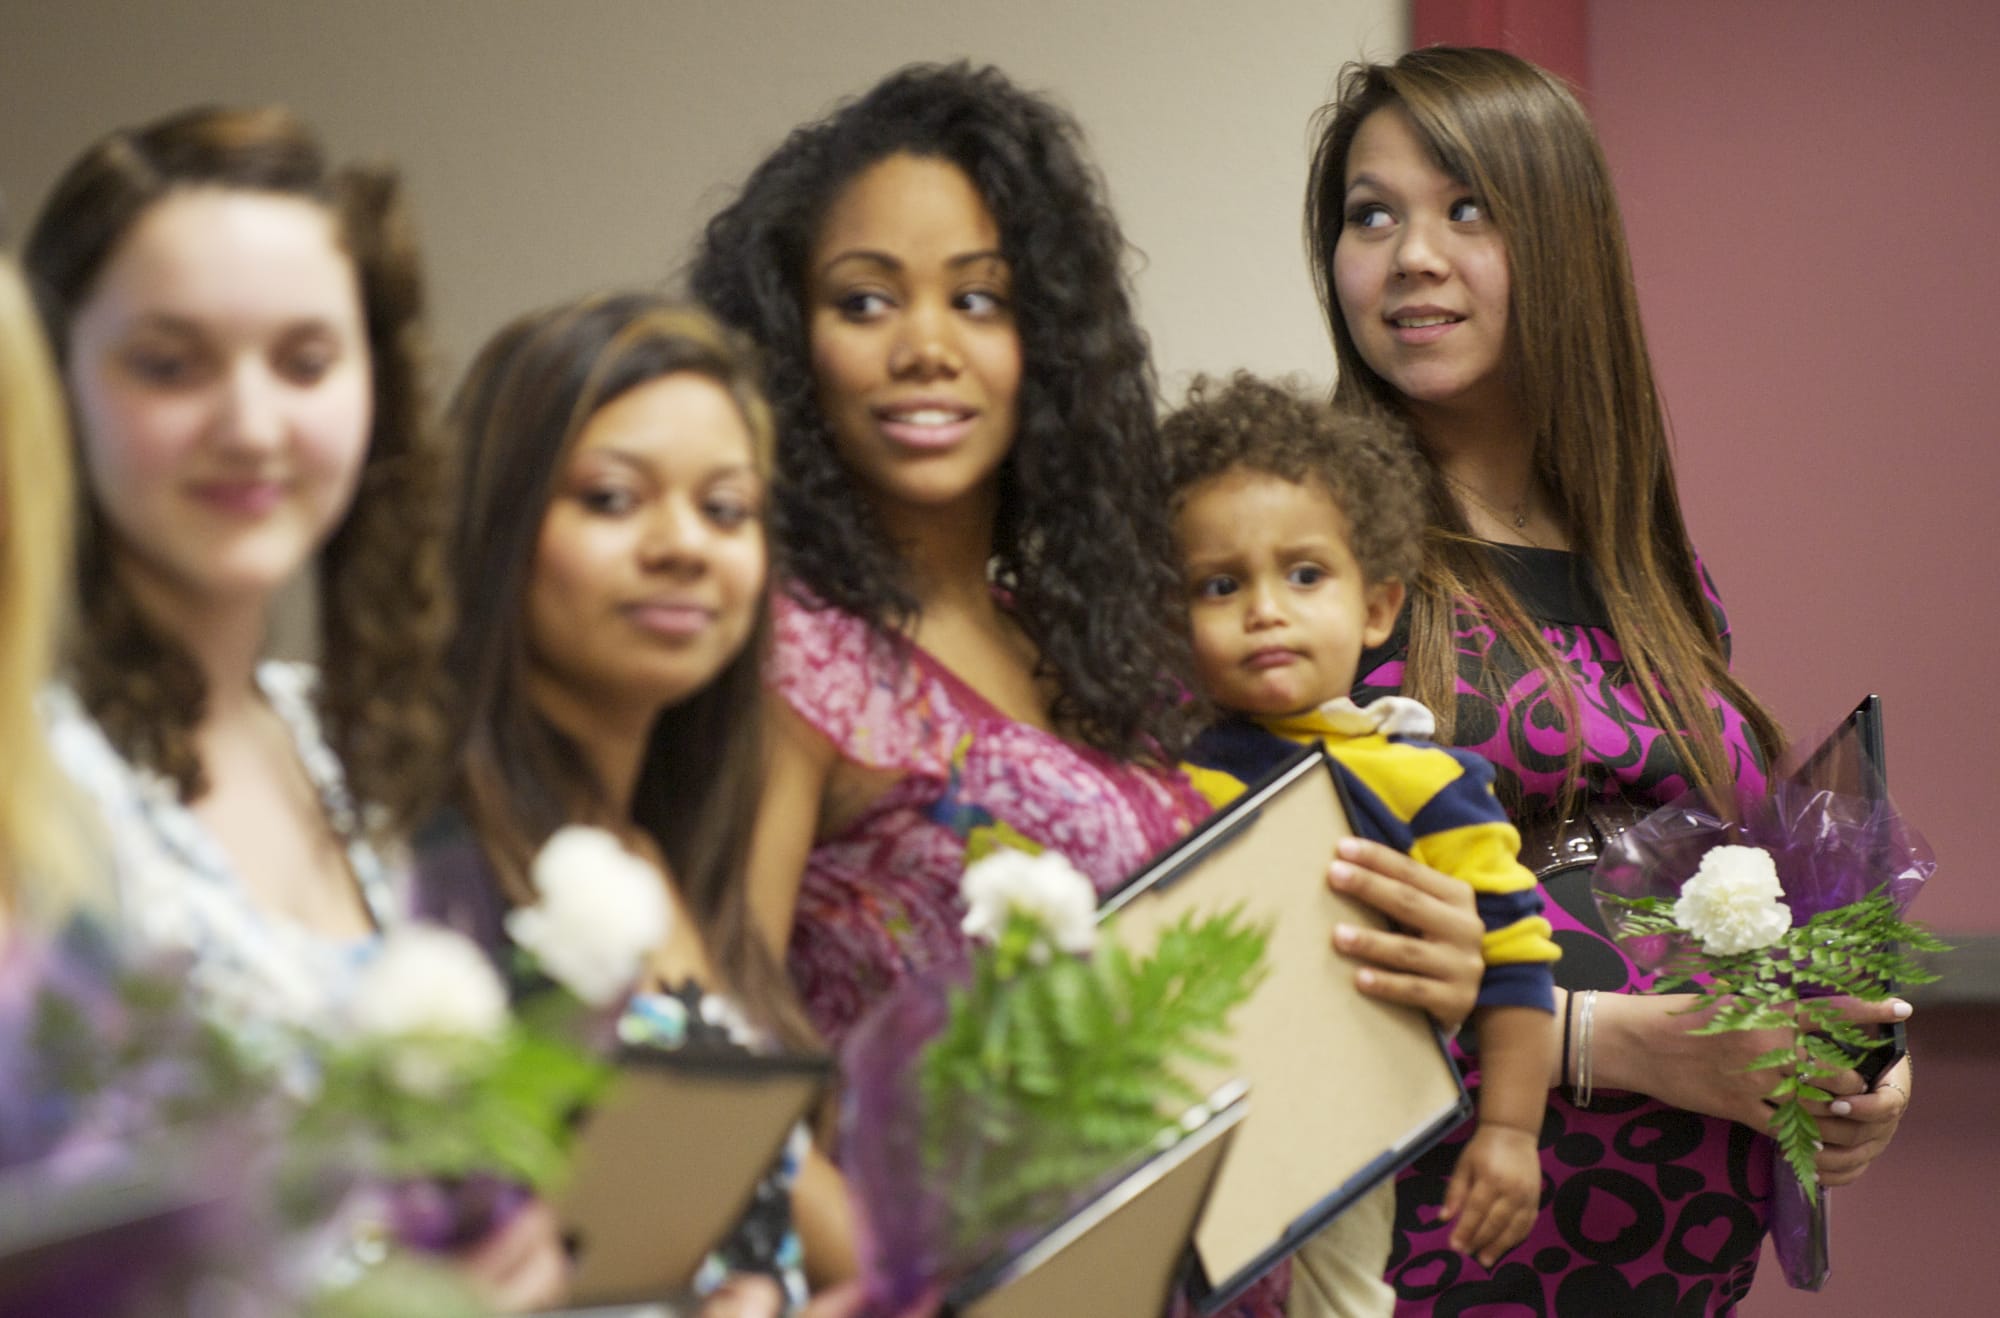 Desiree Barrera-Poulsen, right, and about a dozen other pregnant and parenting teens are recognized for completing the GRADS program during a ceremony at the Bates Center in Vancouver Wednesday.